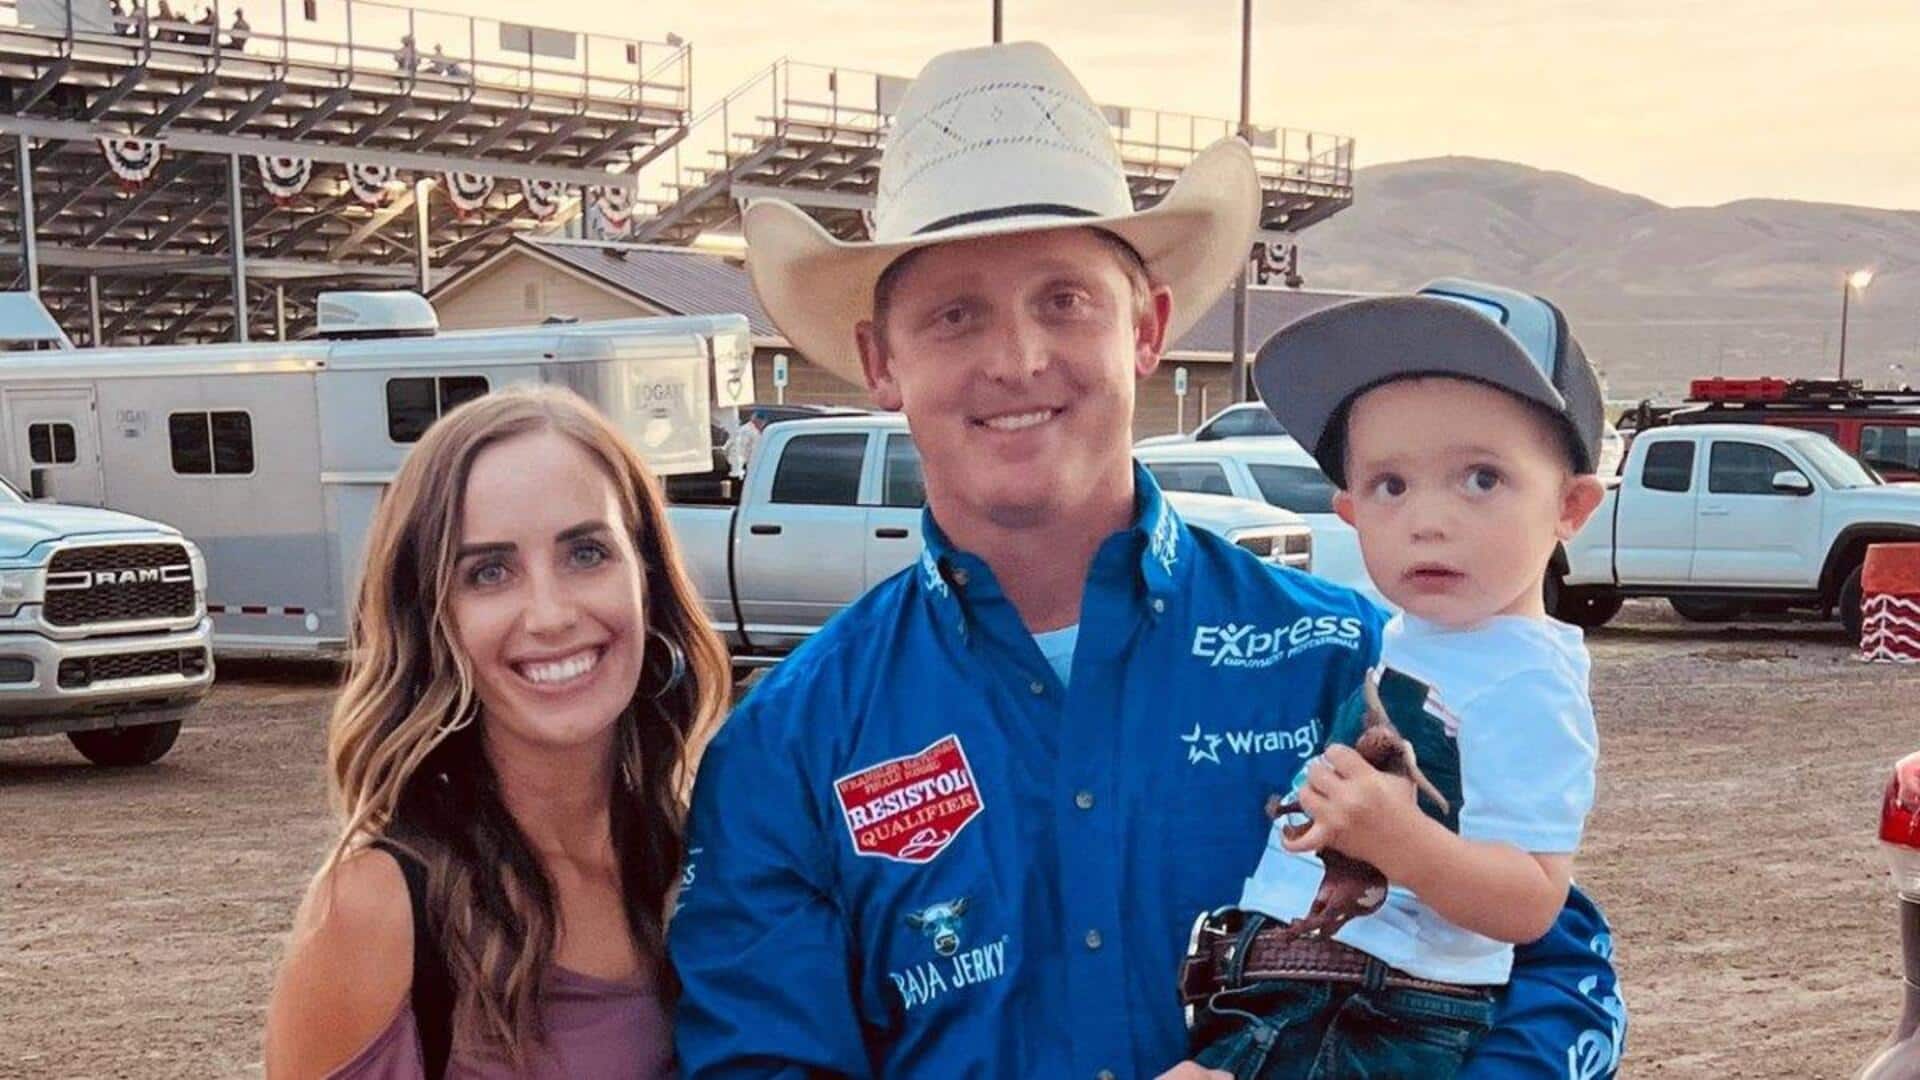 Spencer Wright's 3yr old son dies two weeks post-drowning accident